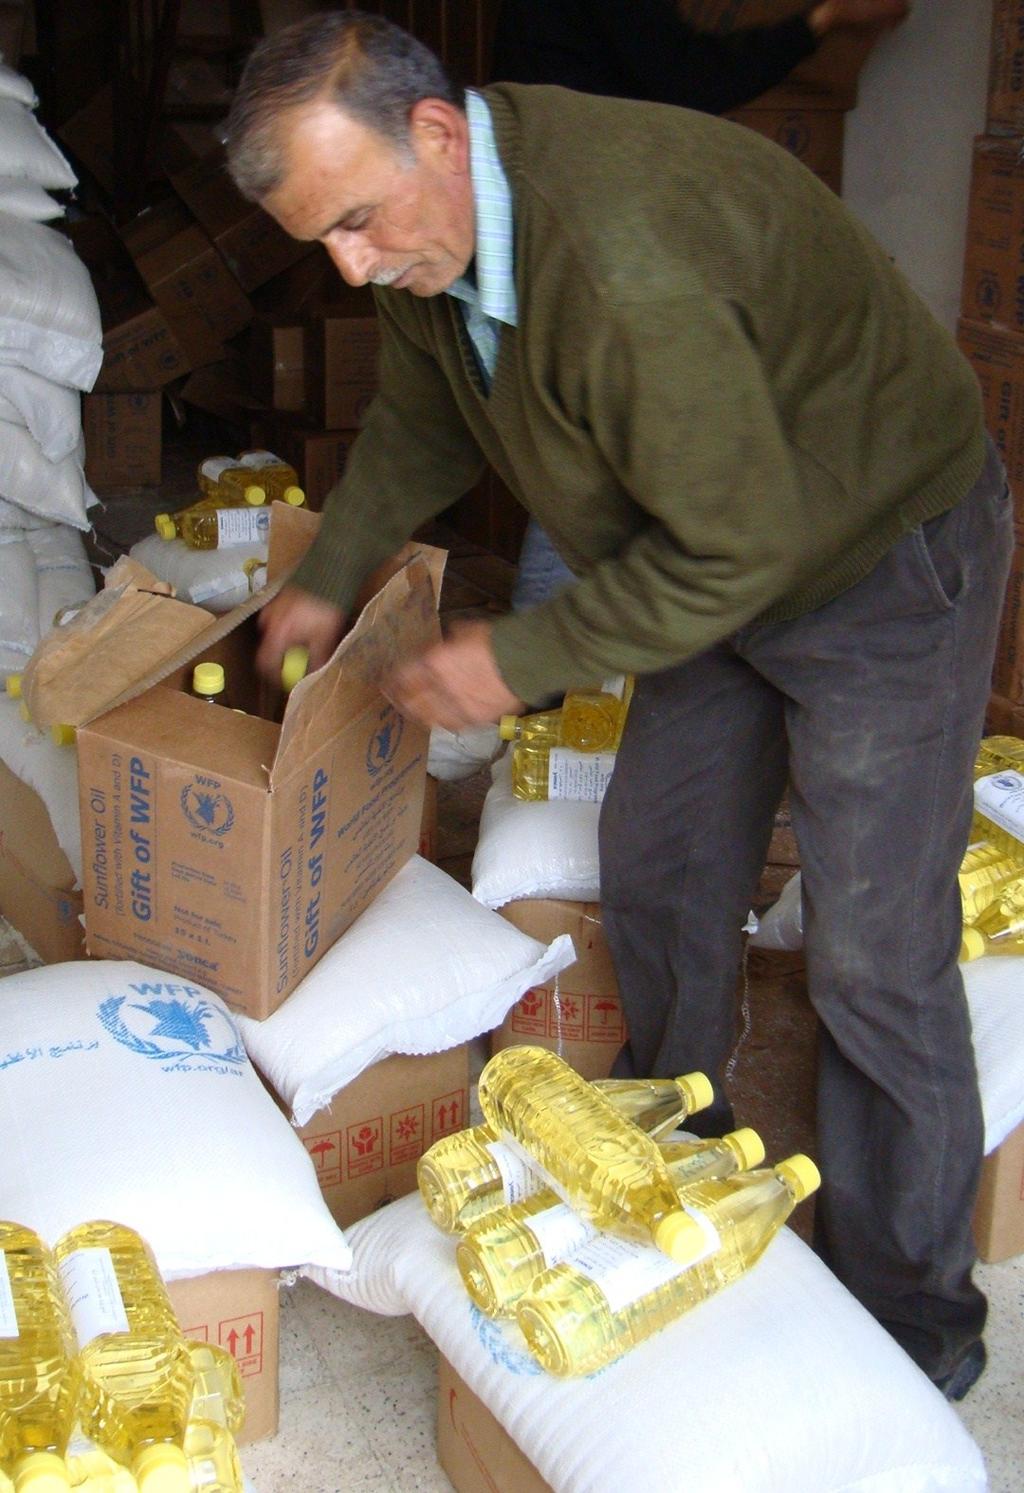 Reduced Rations This month, due to delays in the arrival of some commodities and the inability to purchase these commodities locally, WFP has reduced the amount of lentils and canned pulses for